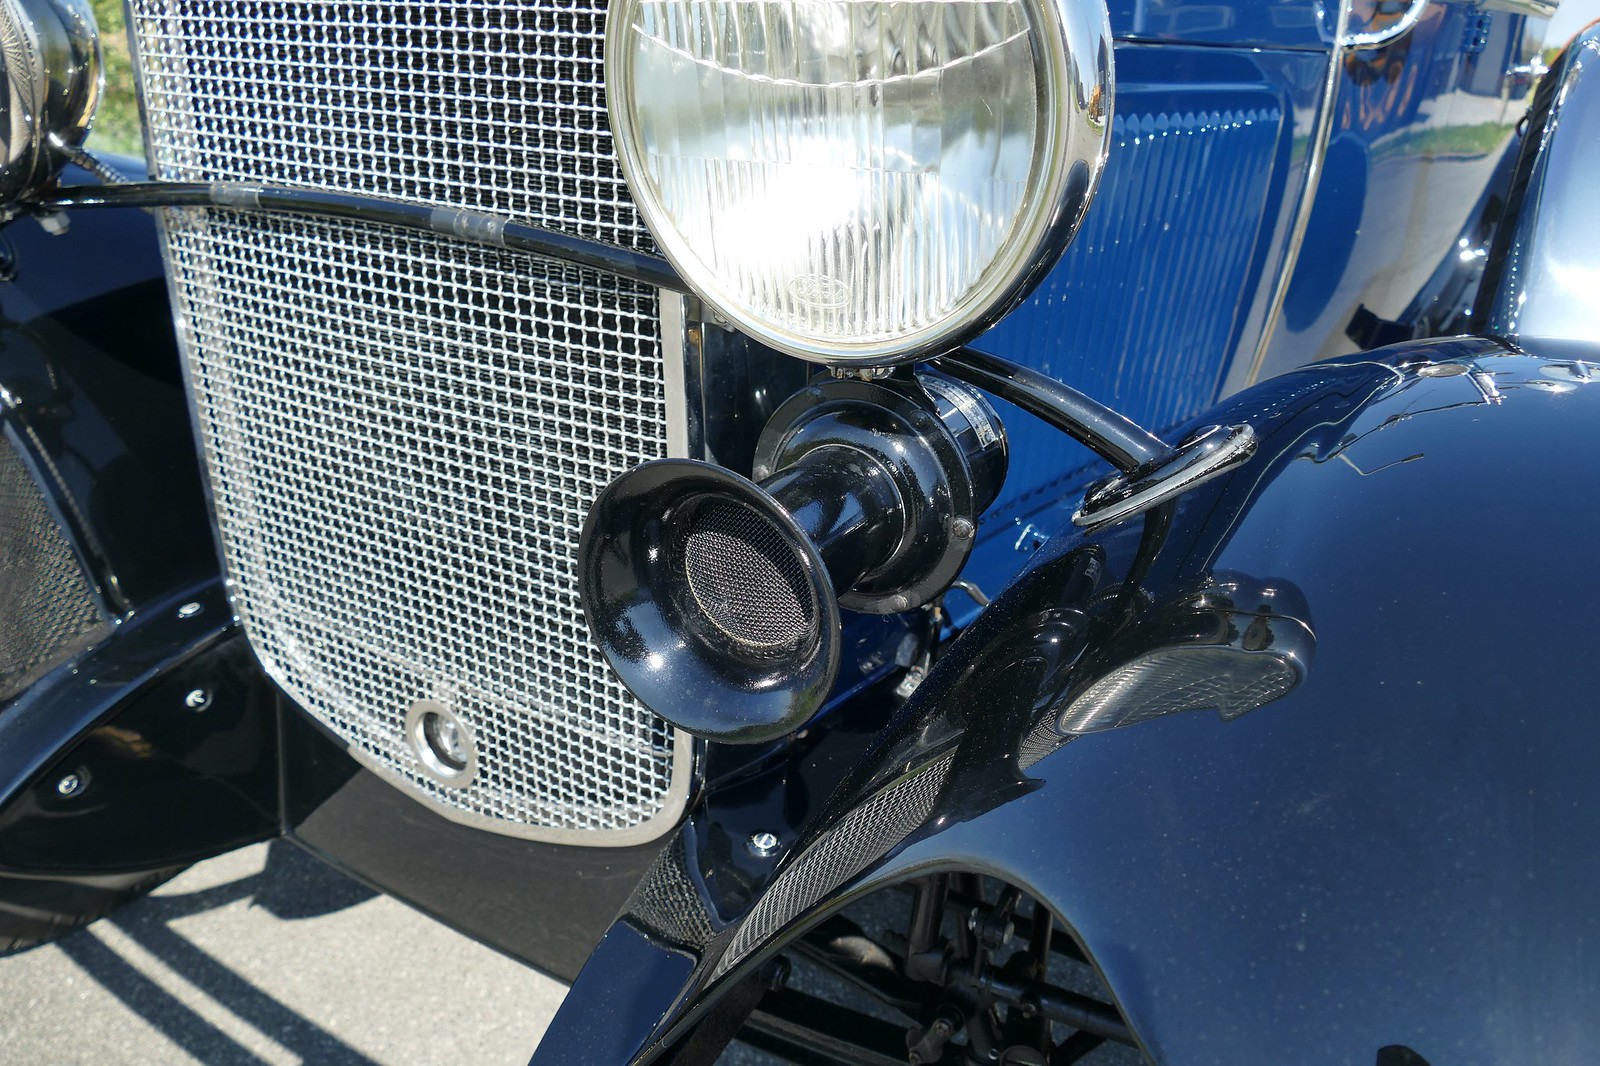 Ford Model A Roadster DeLuxe 1931